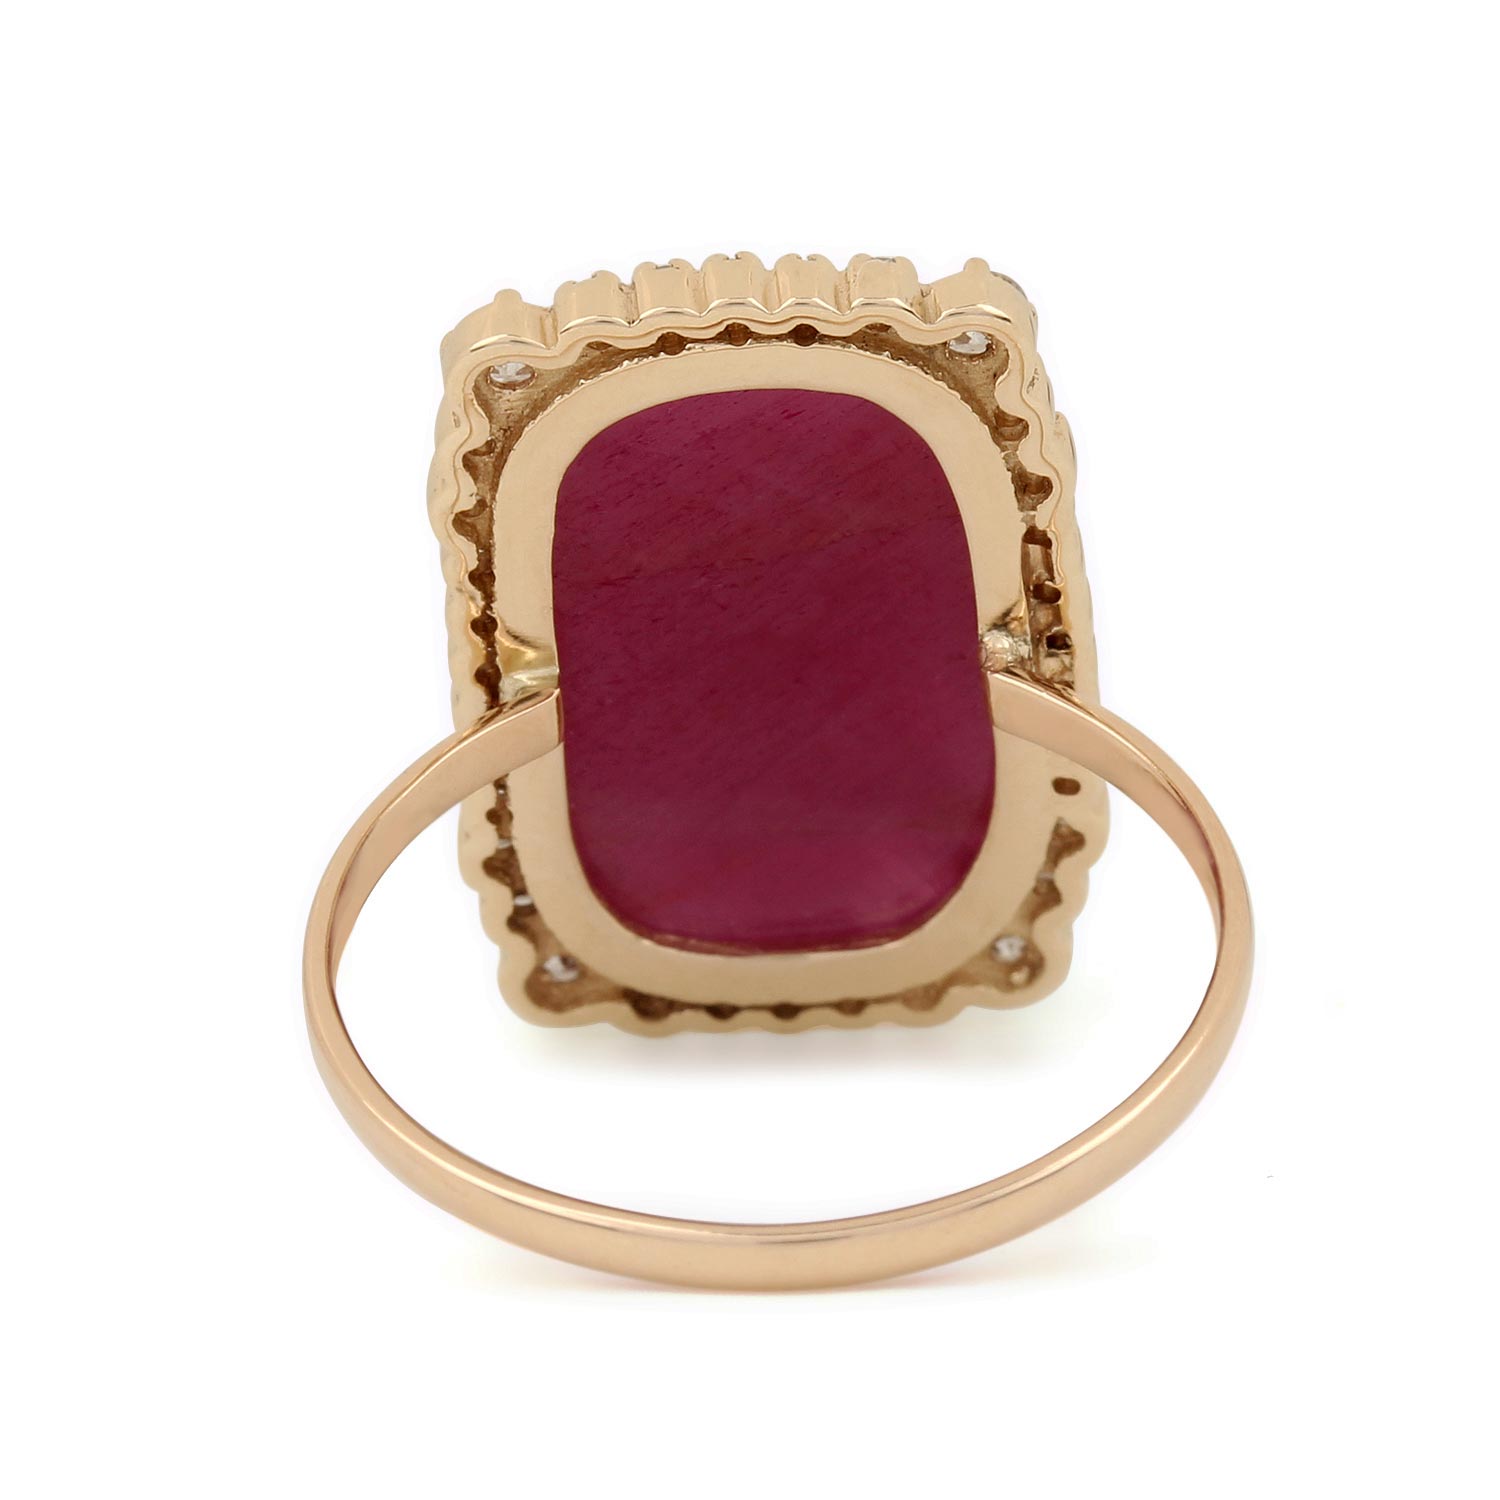 Ruby Gemstone 14K Solid Gold Ring Pave Diamond Jewelry